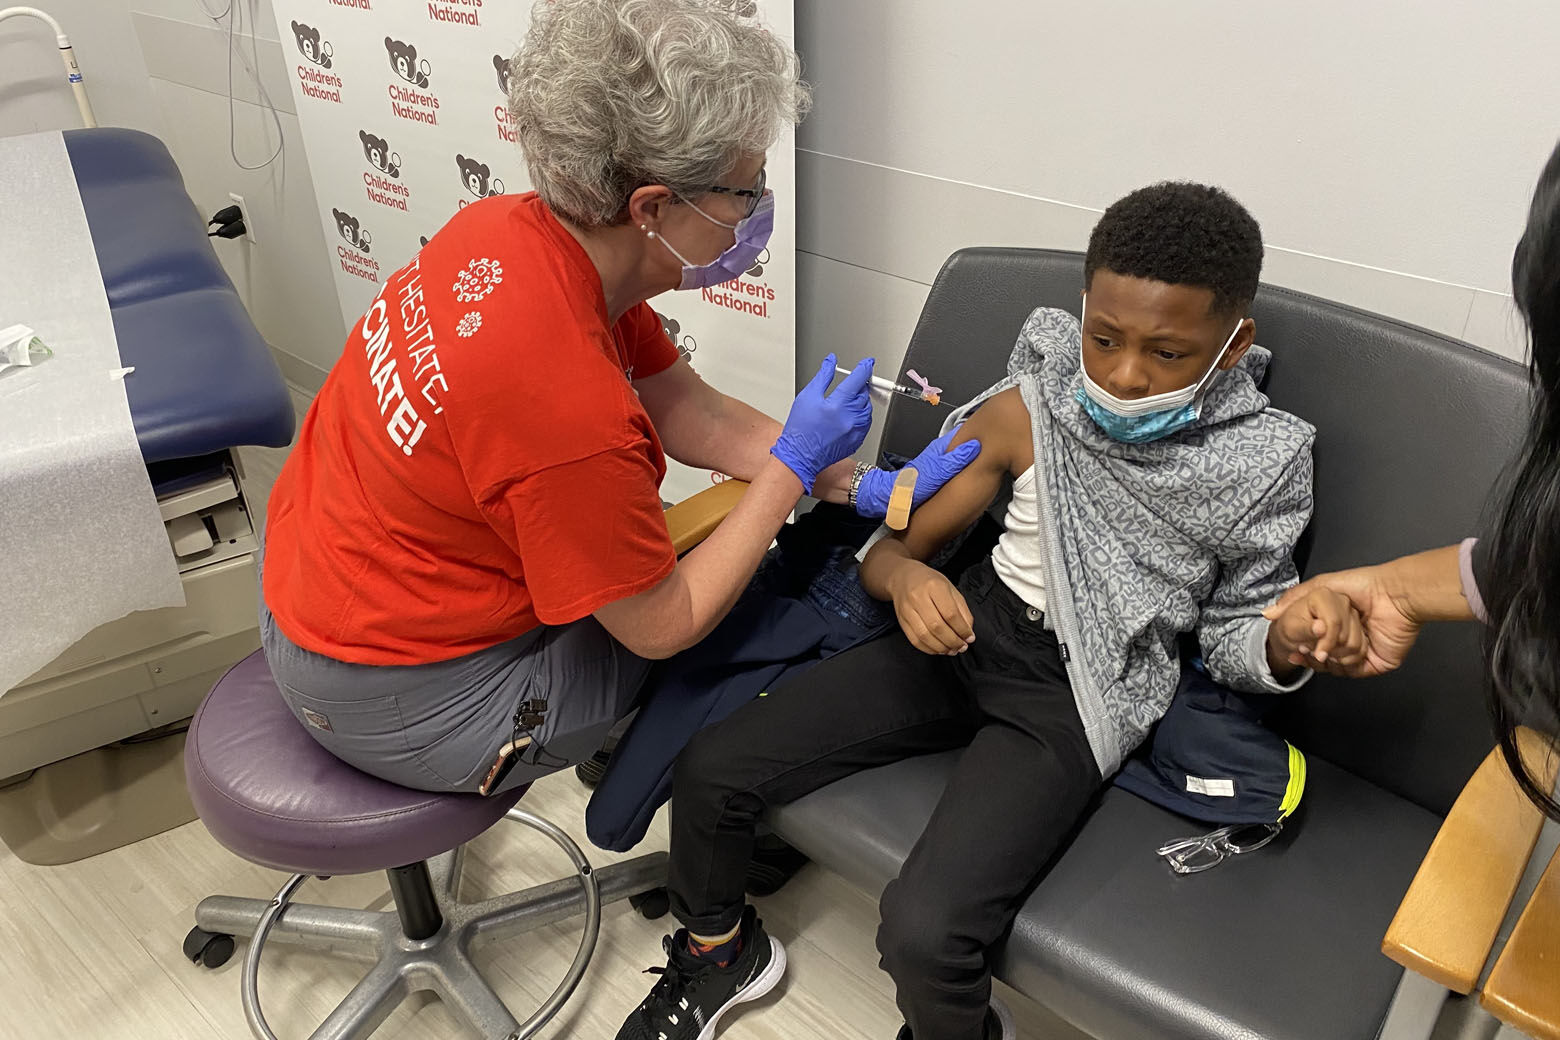 Aiden Lewis, 10, rolled up his sleeve for one of the first shots in D.C. (WTOP/John Aaron)